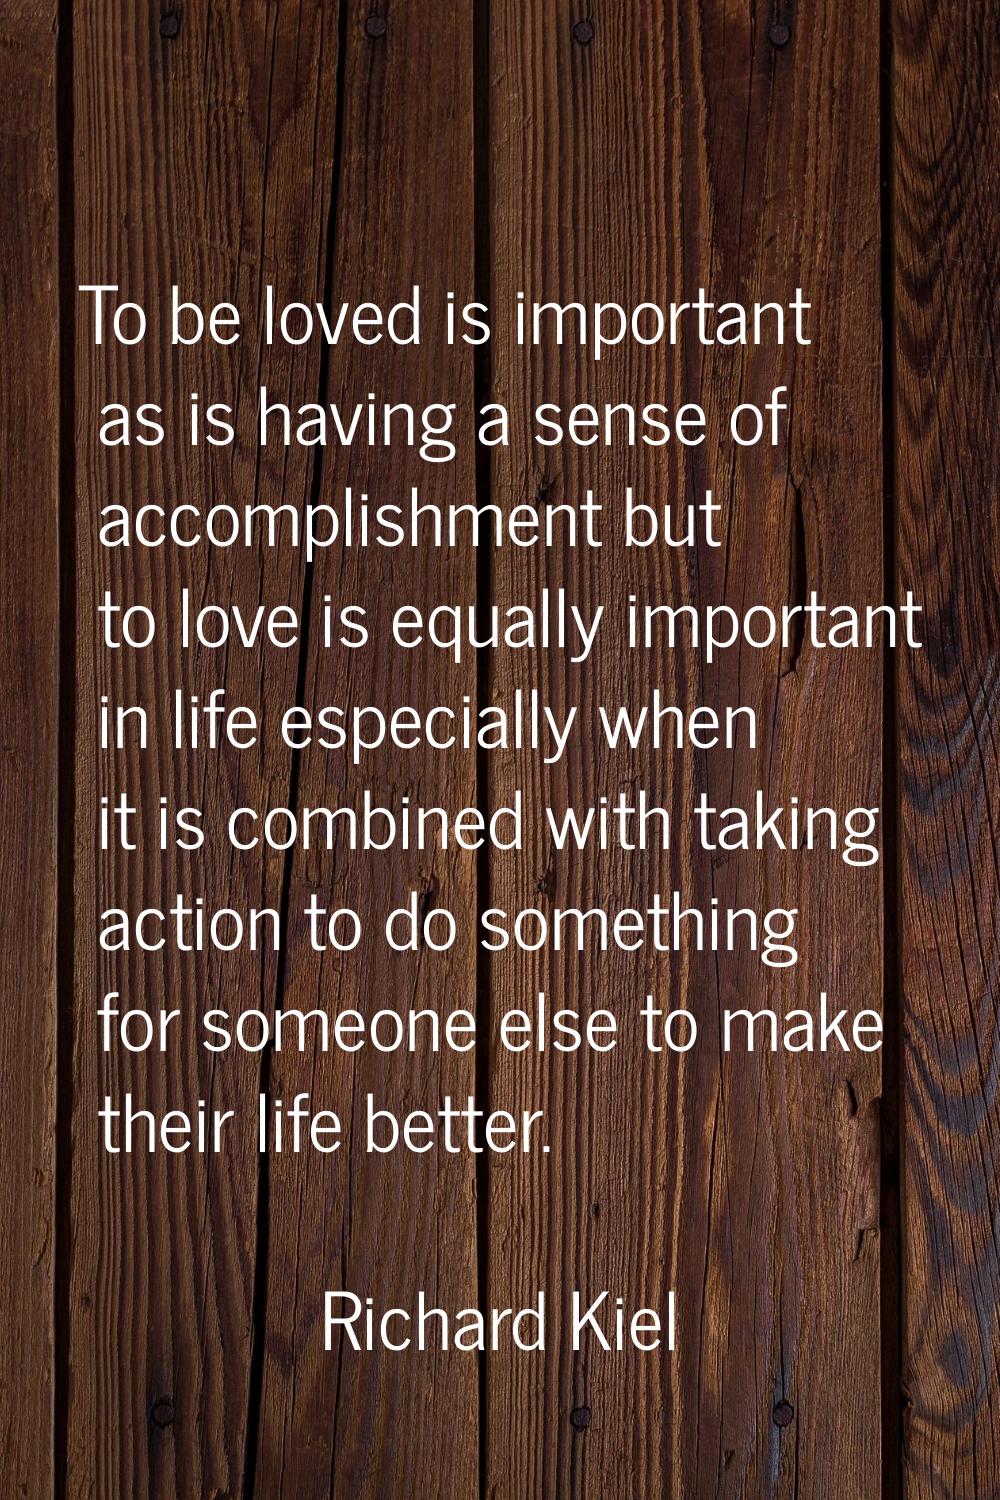 To be loved is important as is having a sense of accomplishment but to love is equally important in